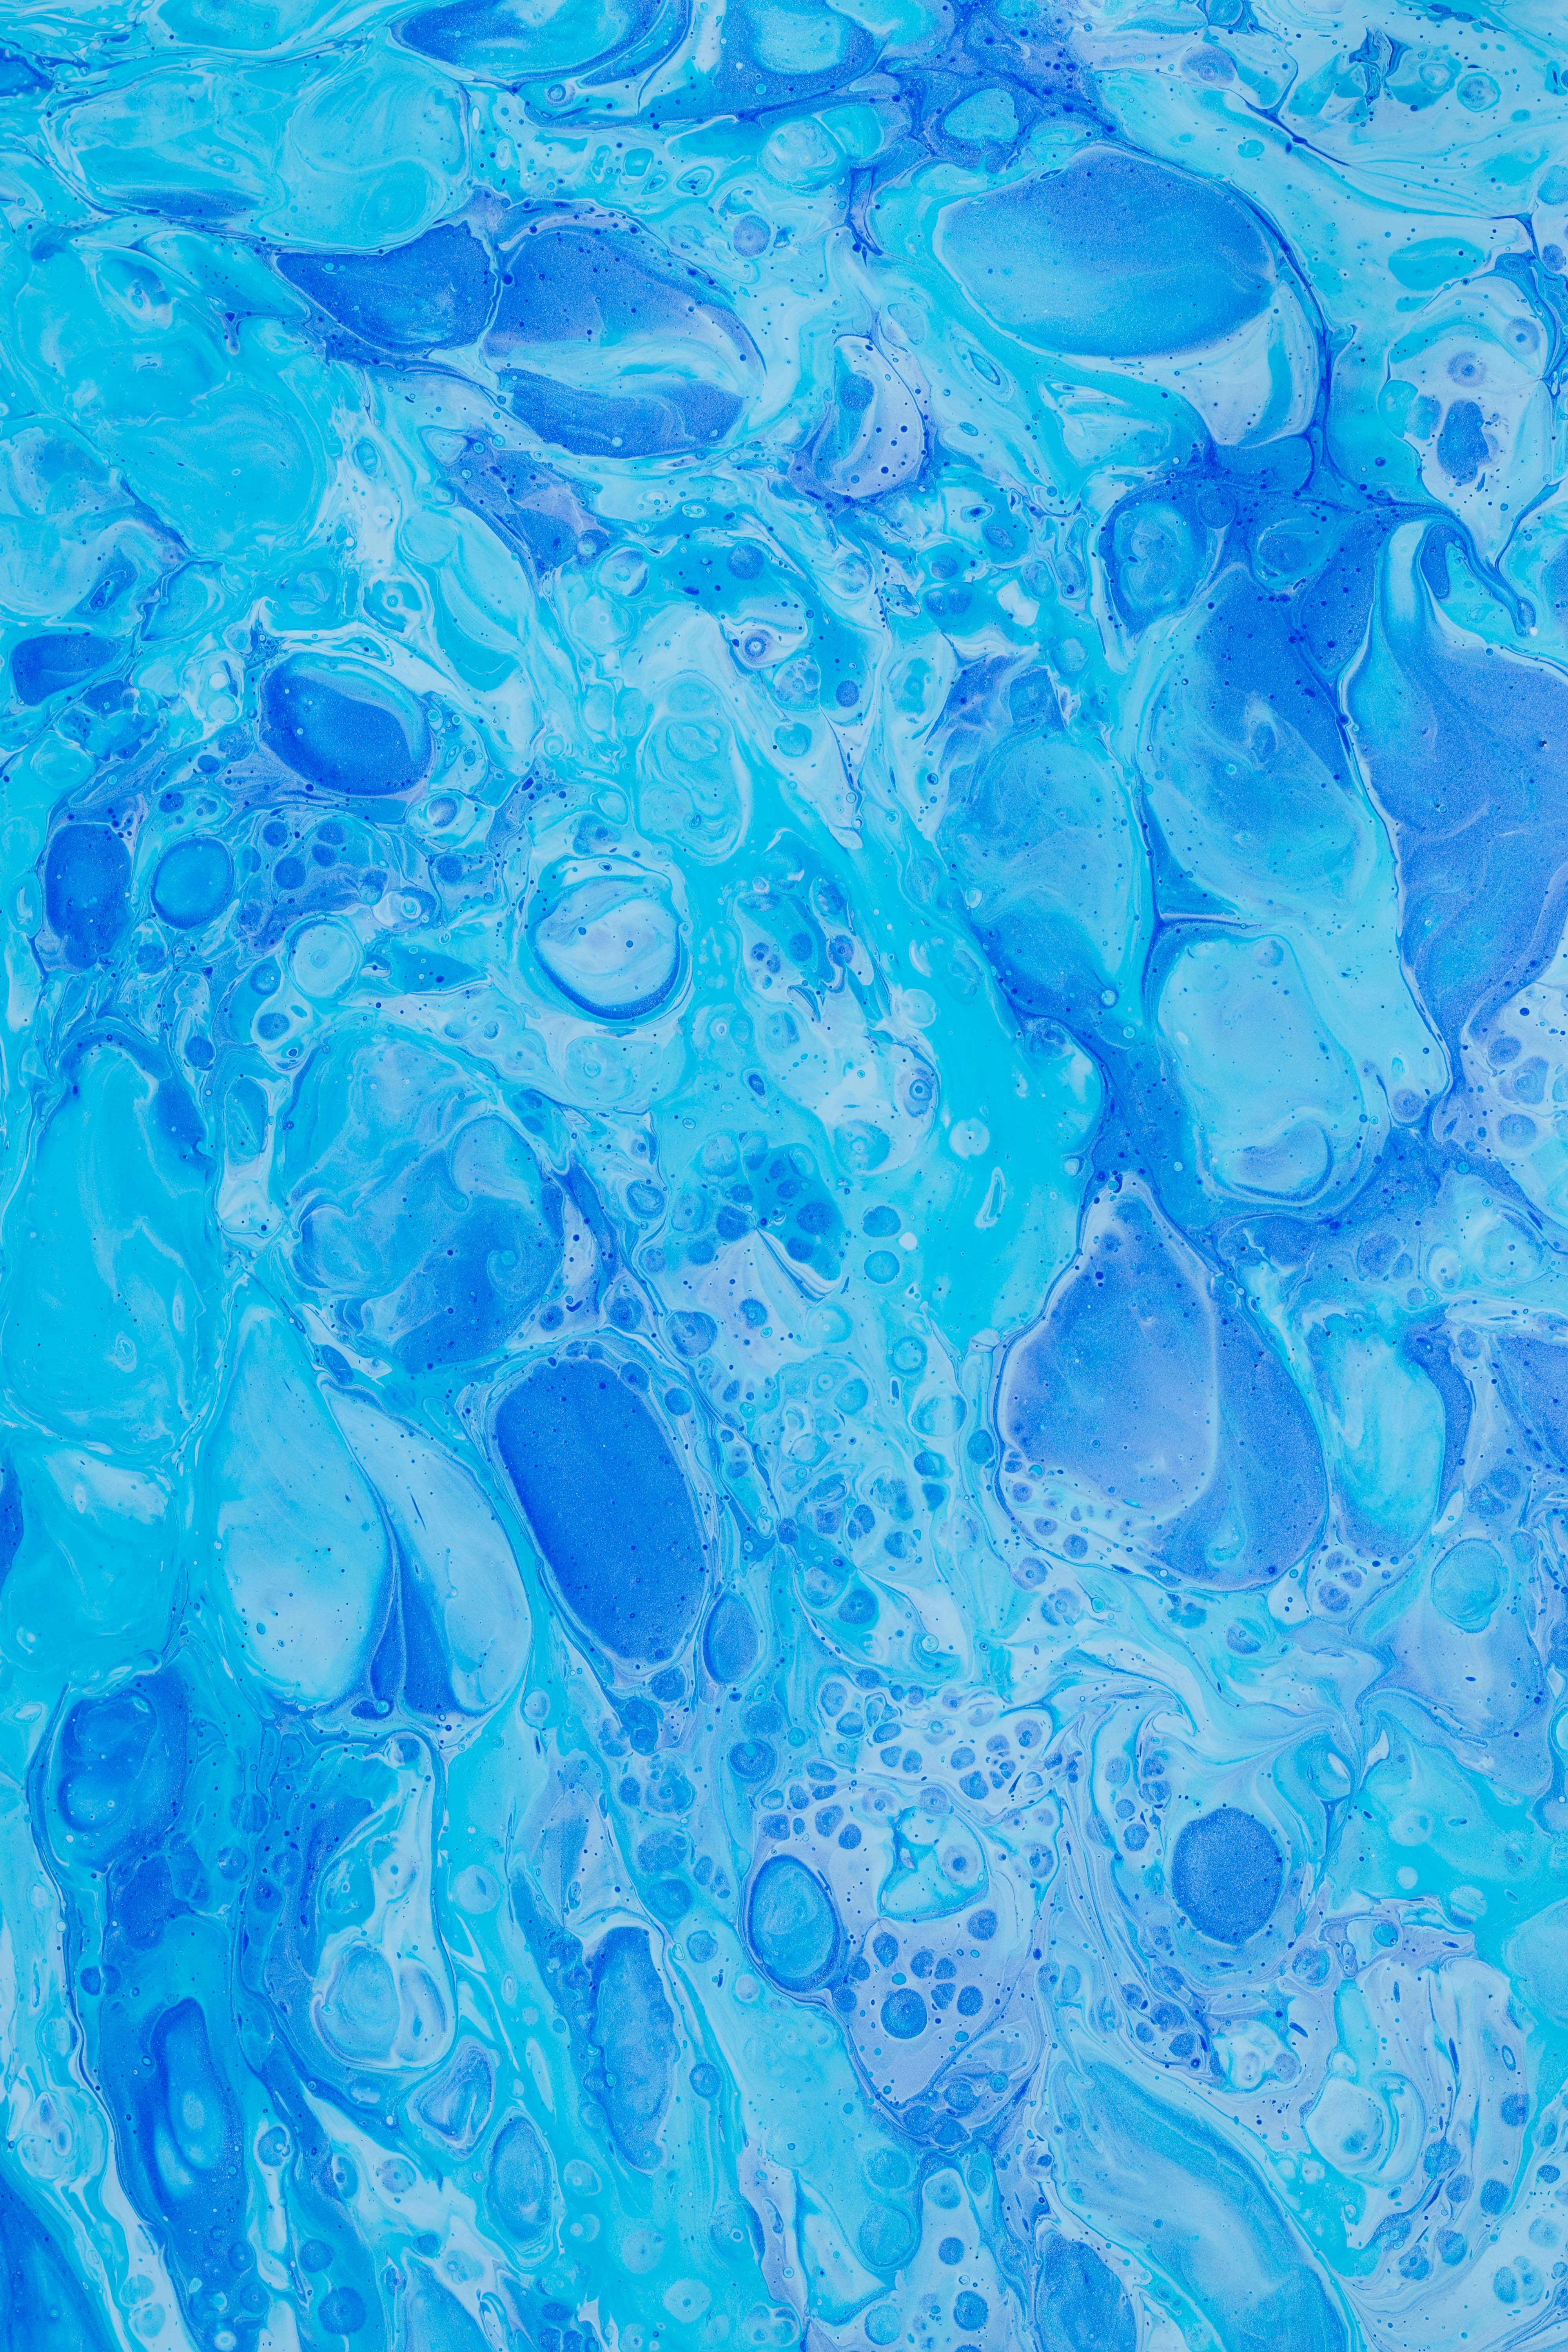 abstract, paint, blue, watercolor, stains, spots